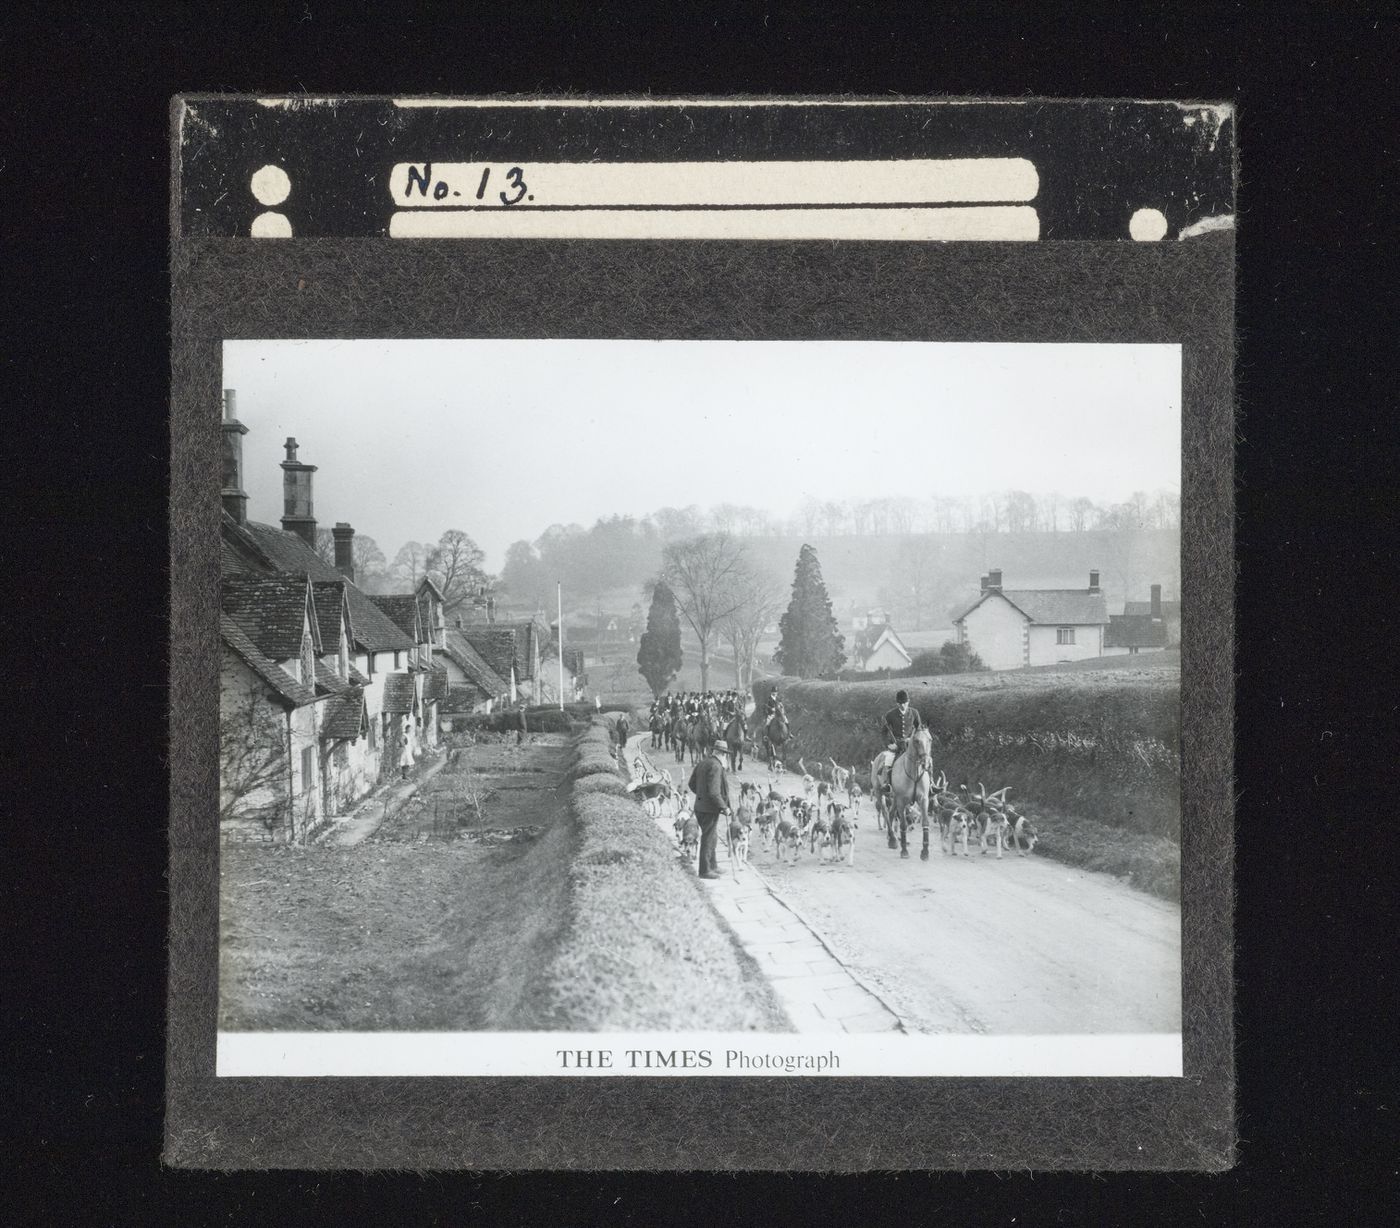 View of a fox hunt with a pack of hounds, master, huntsmen and followers riding on a road through a village in the countryside.